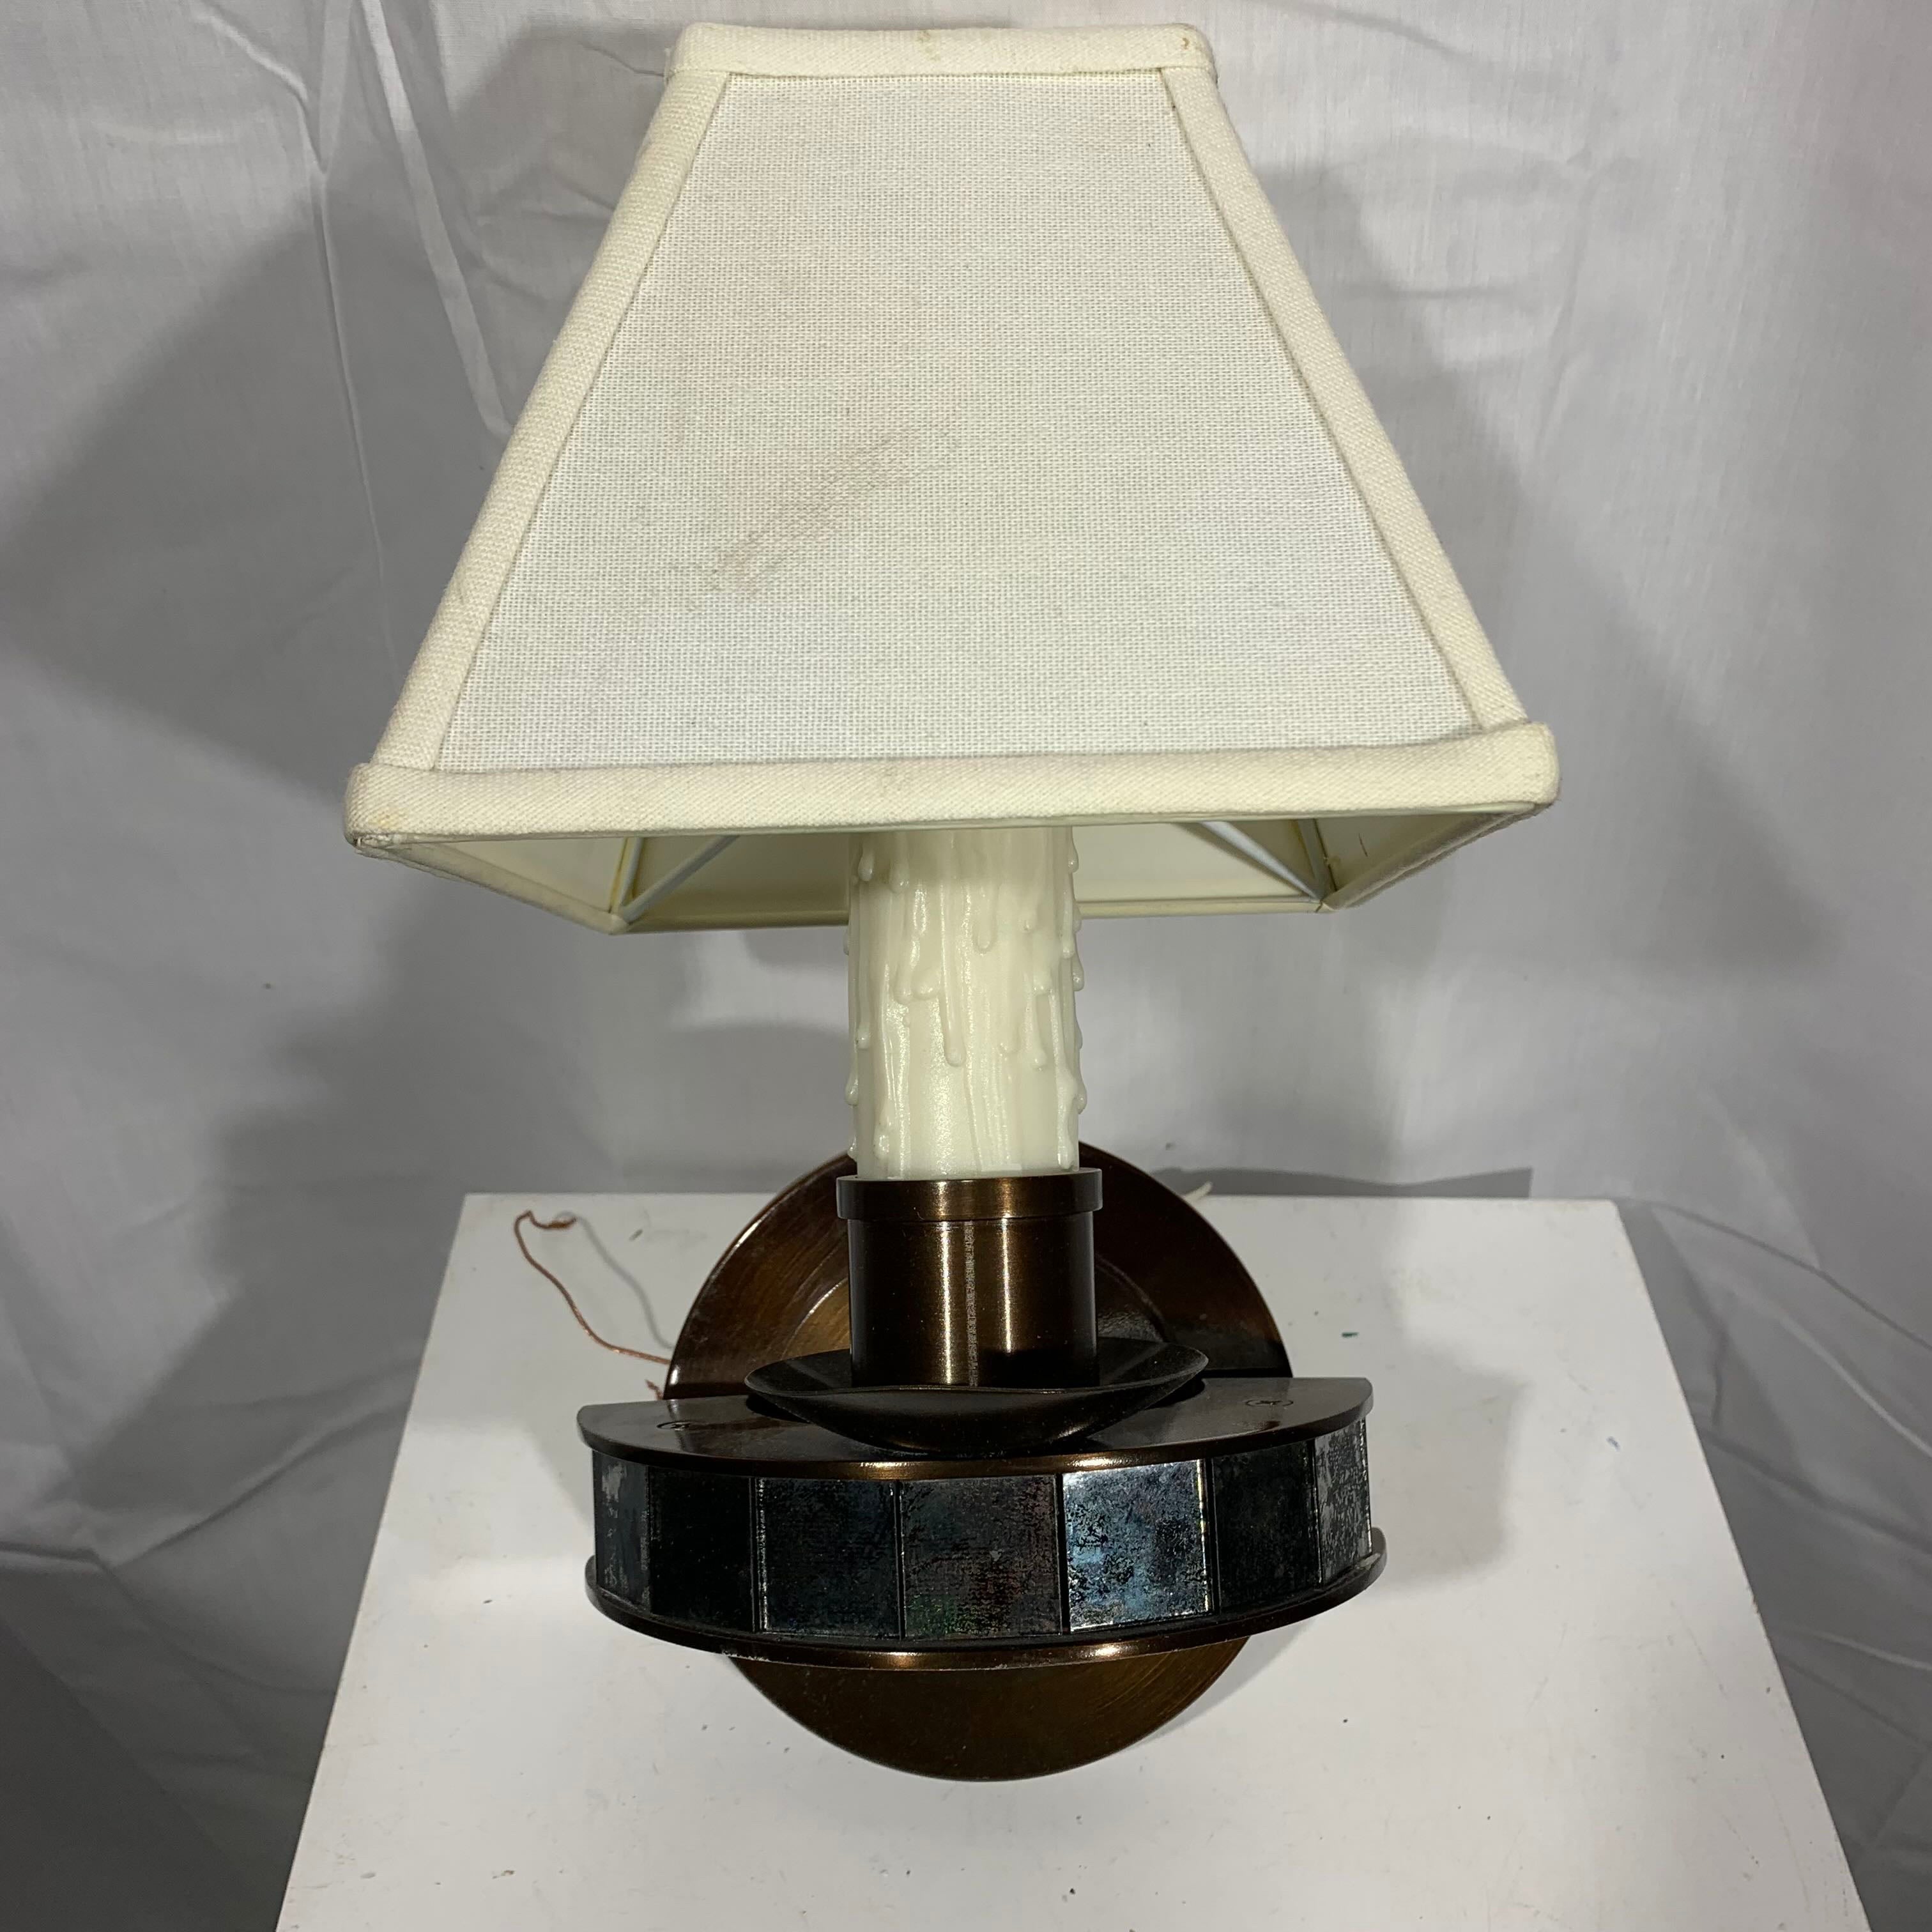 6.5"x 6.5"x 11" Louis Baldinger and Sons Brown Metal with Candle Accent and Shade Various Condition Wall Sconce